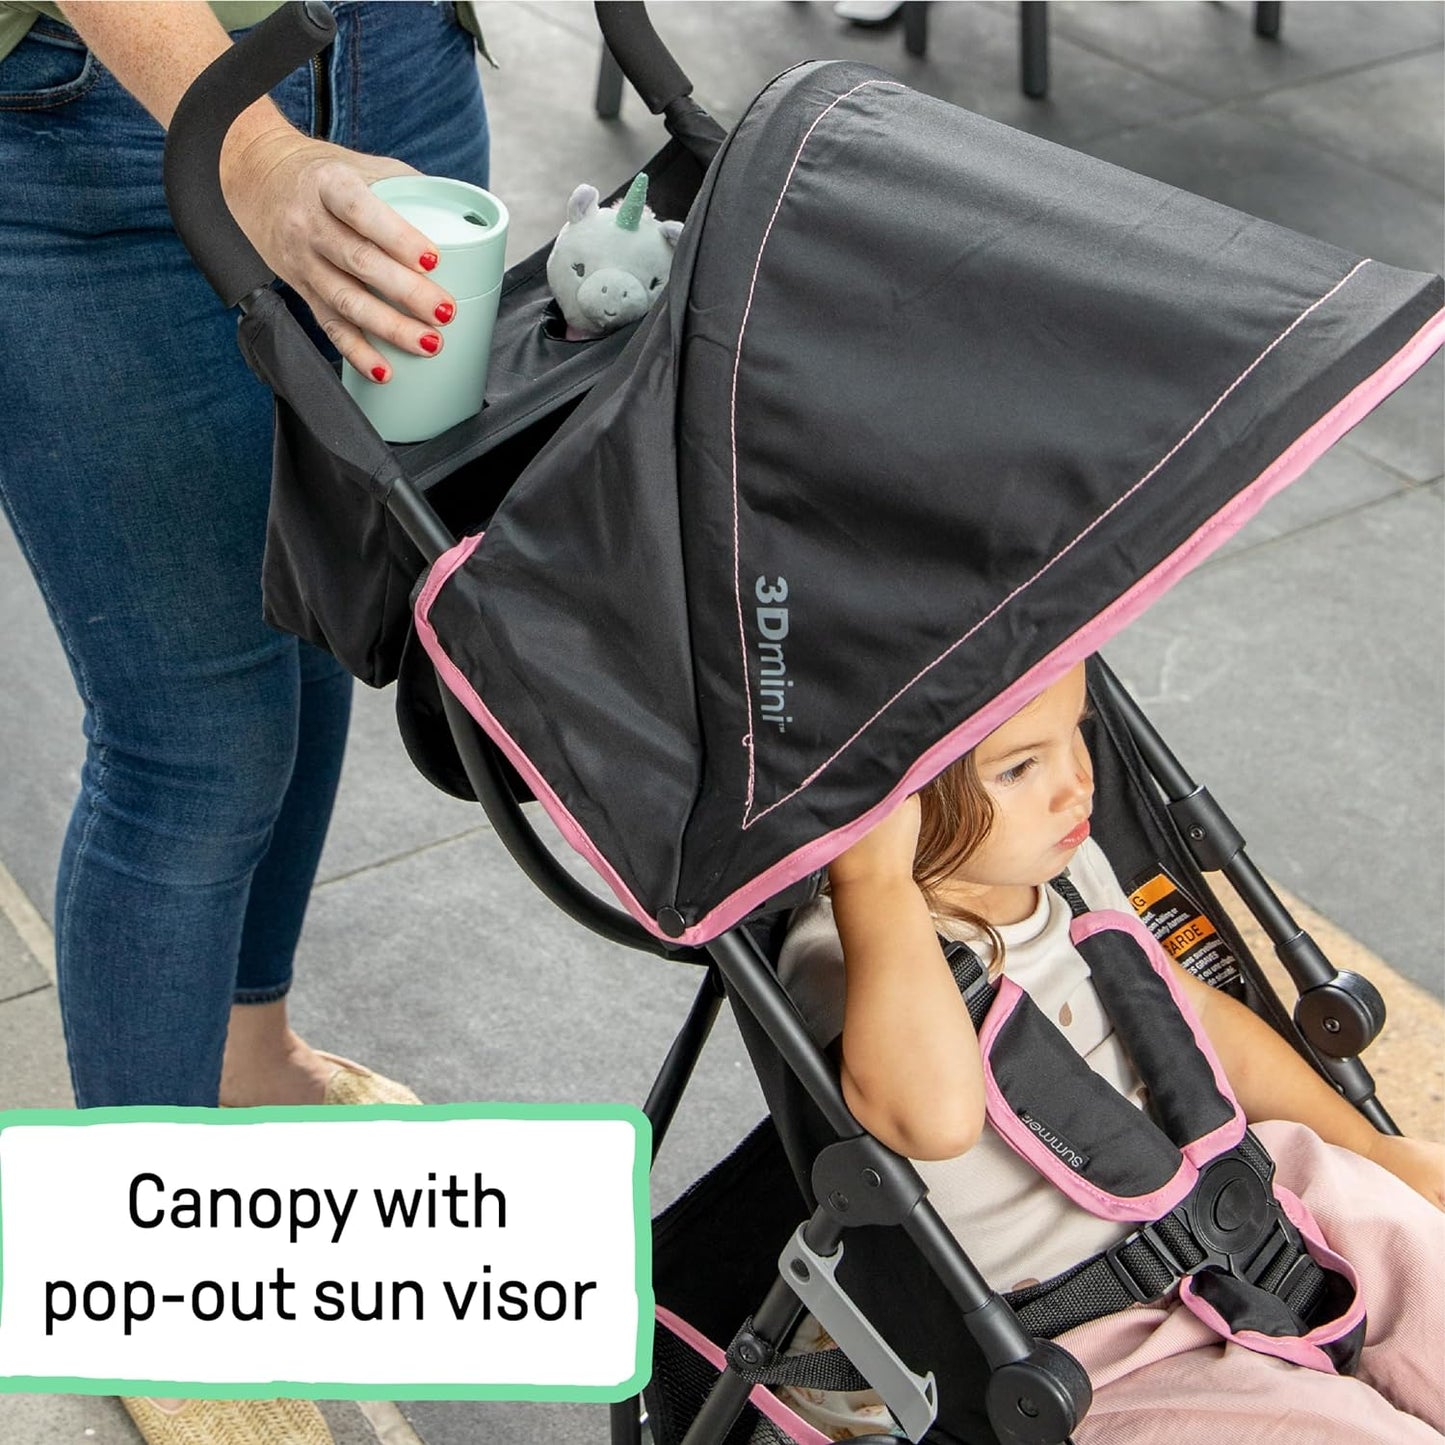 3Dmini Convenience Stroller, Pink – Lightweight Stroller with Compact Fold, Multi-Position Recline, Canopy with Pop Out Sun Visor and More – Umbrella Stroller for Travel